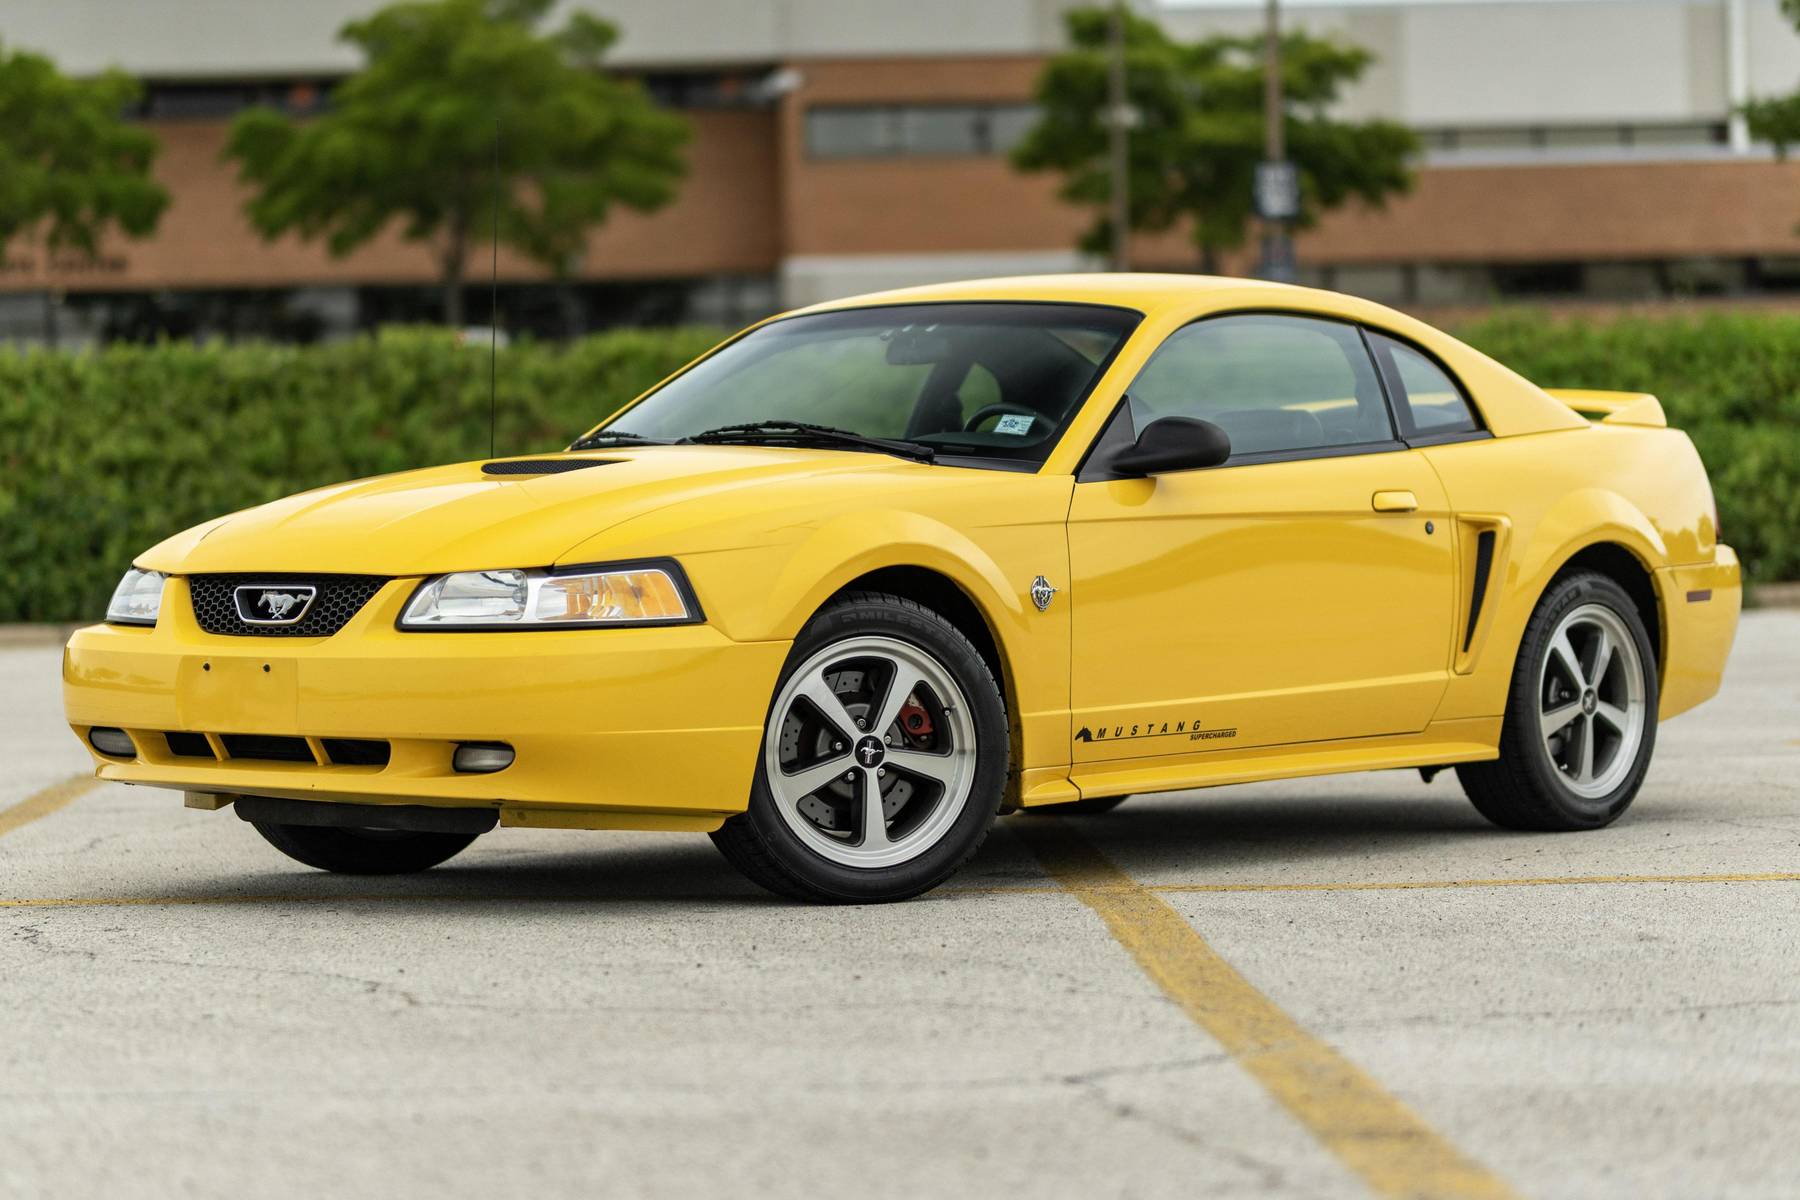 Chrome Yellow 1999 Ford Mustang